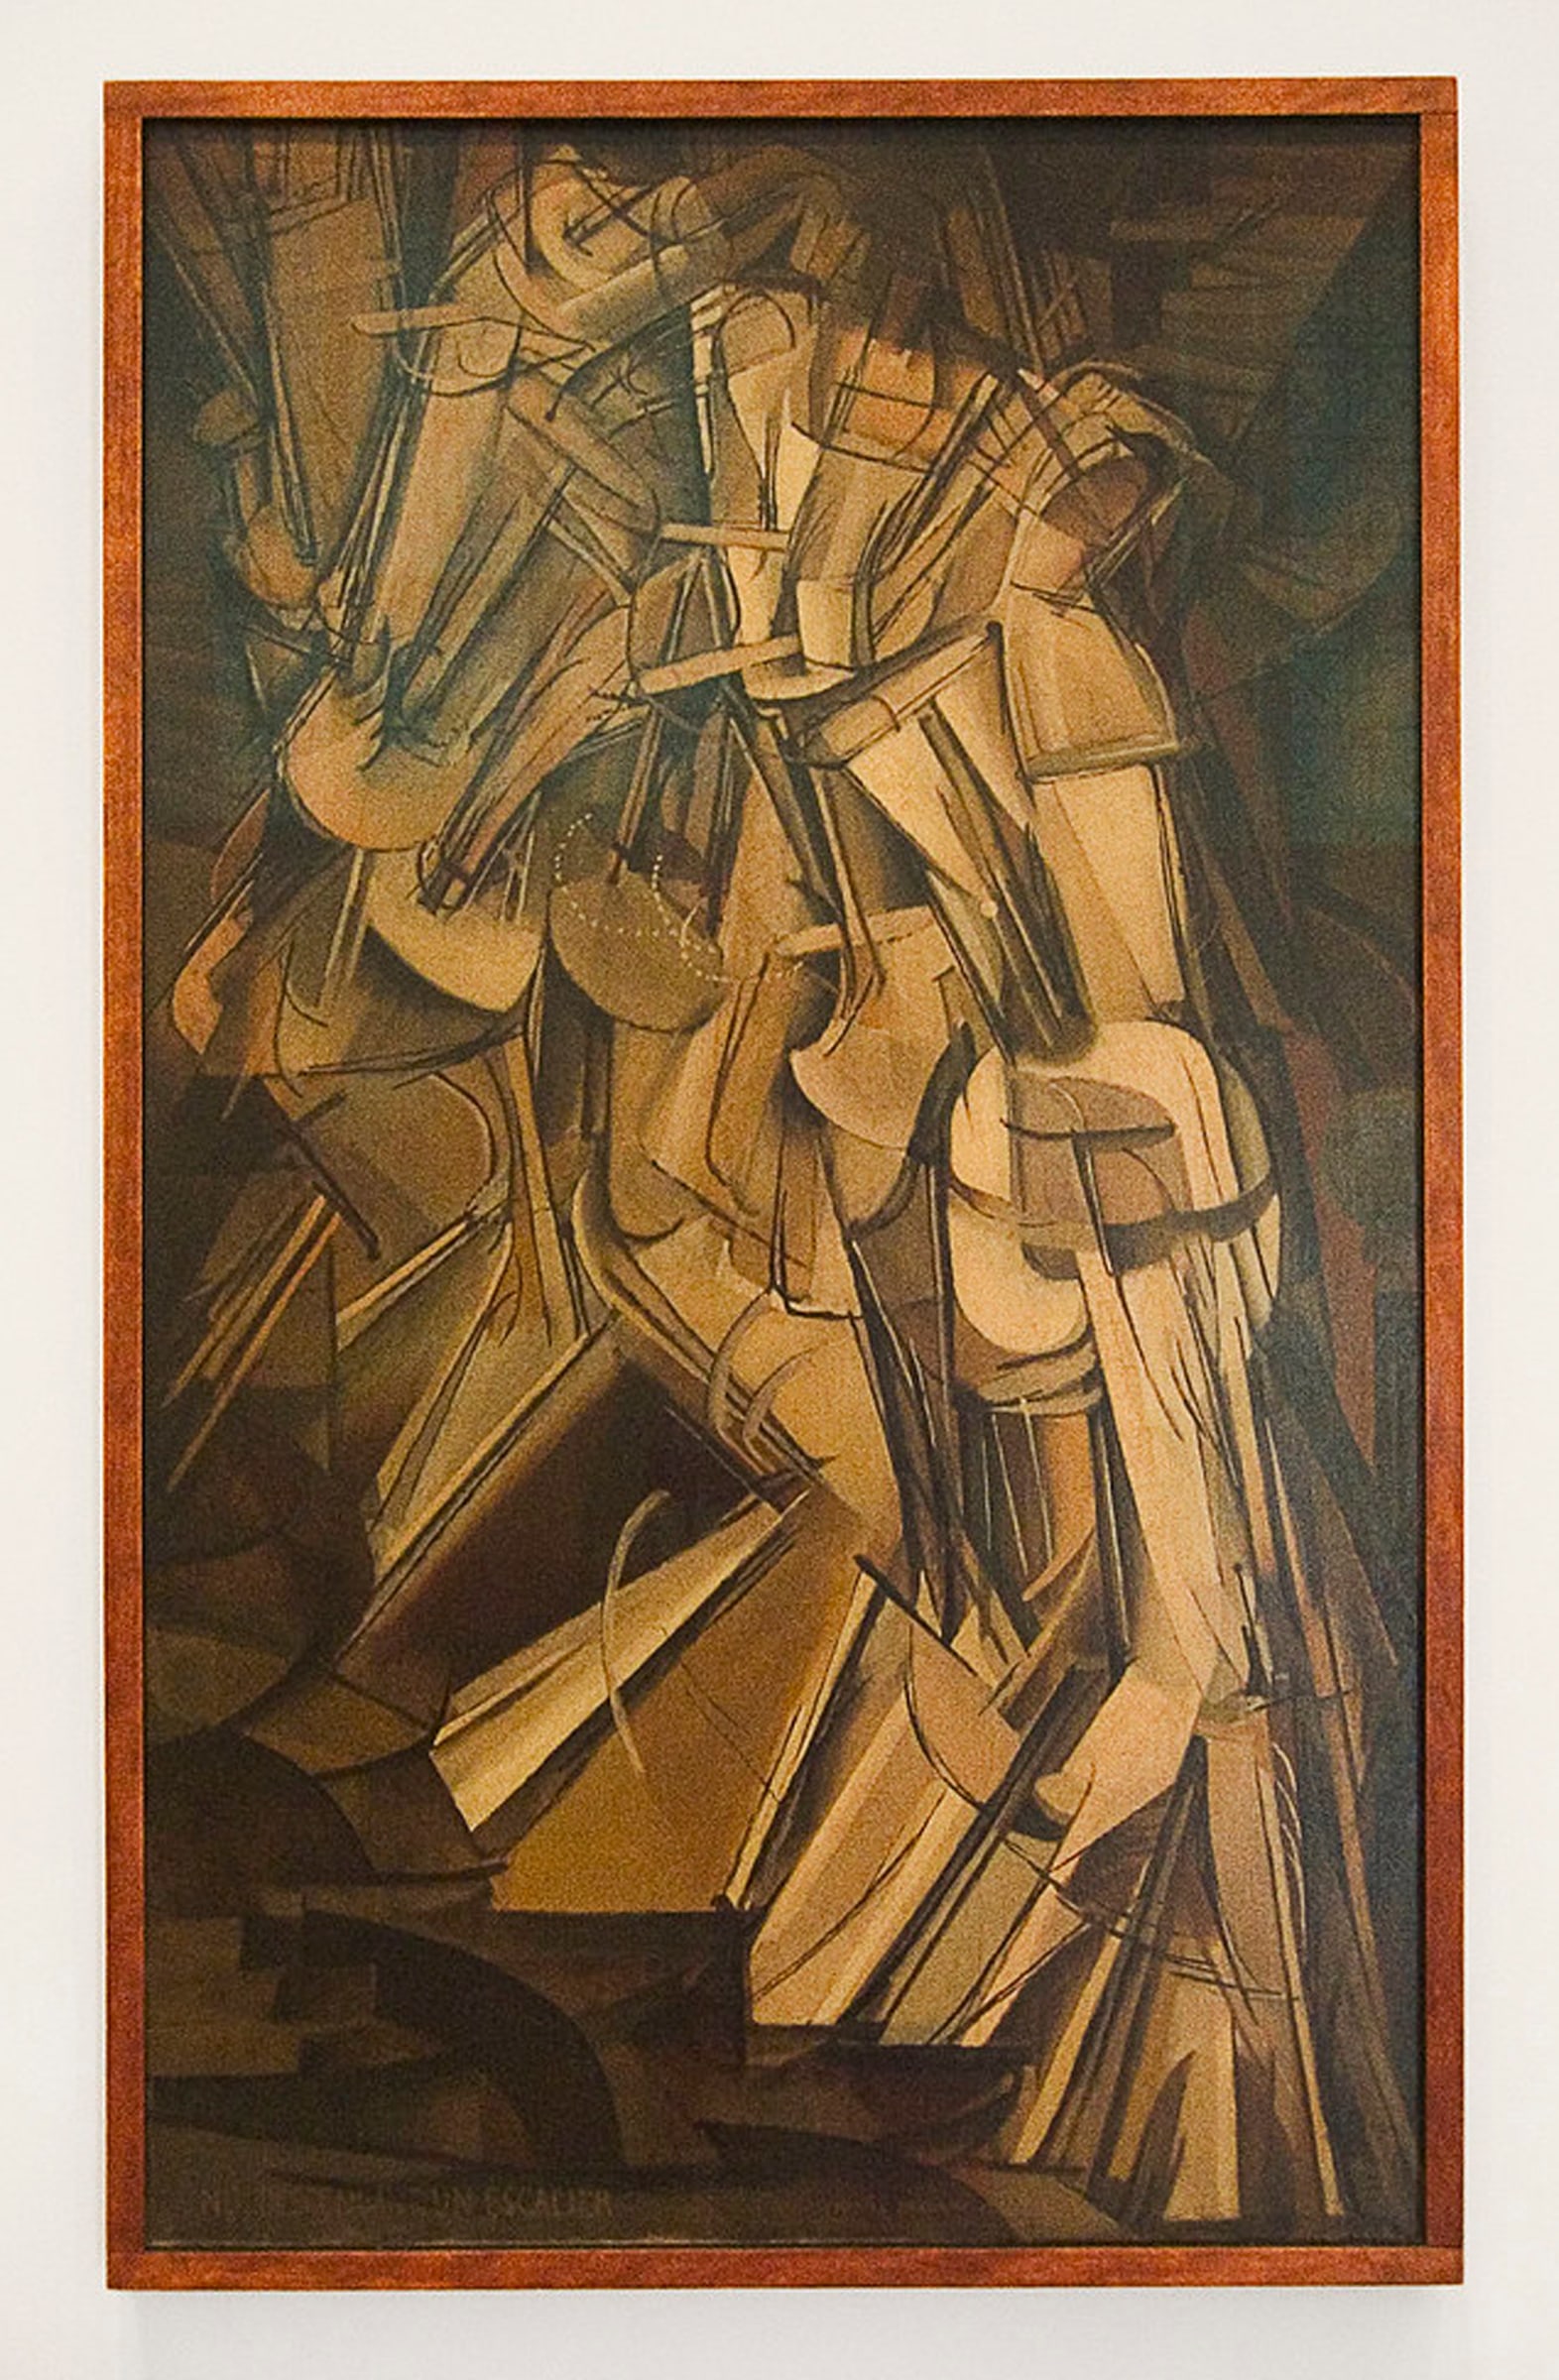 Marcel Duchamp&amp;nbsp;
Nude Descending a Staircase (No. 2), 1912
oil on canvas
framed: 59 3/4 &amp;times; 36 3/4 &amp;times; 2 inches (151.8 &amp;times; 93.3 &amp;times; 5.1 cm)
Philadelphia Museum of Art: The Louise and Walter Arensberg Collection, 1950
&amp;copy; Artists Rights Society (ARS), New York / ADAGP, Paris / Succession Marcel Duchamp
&amp;nbsp;